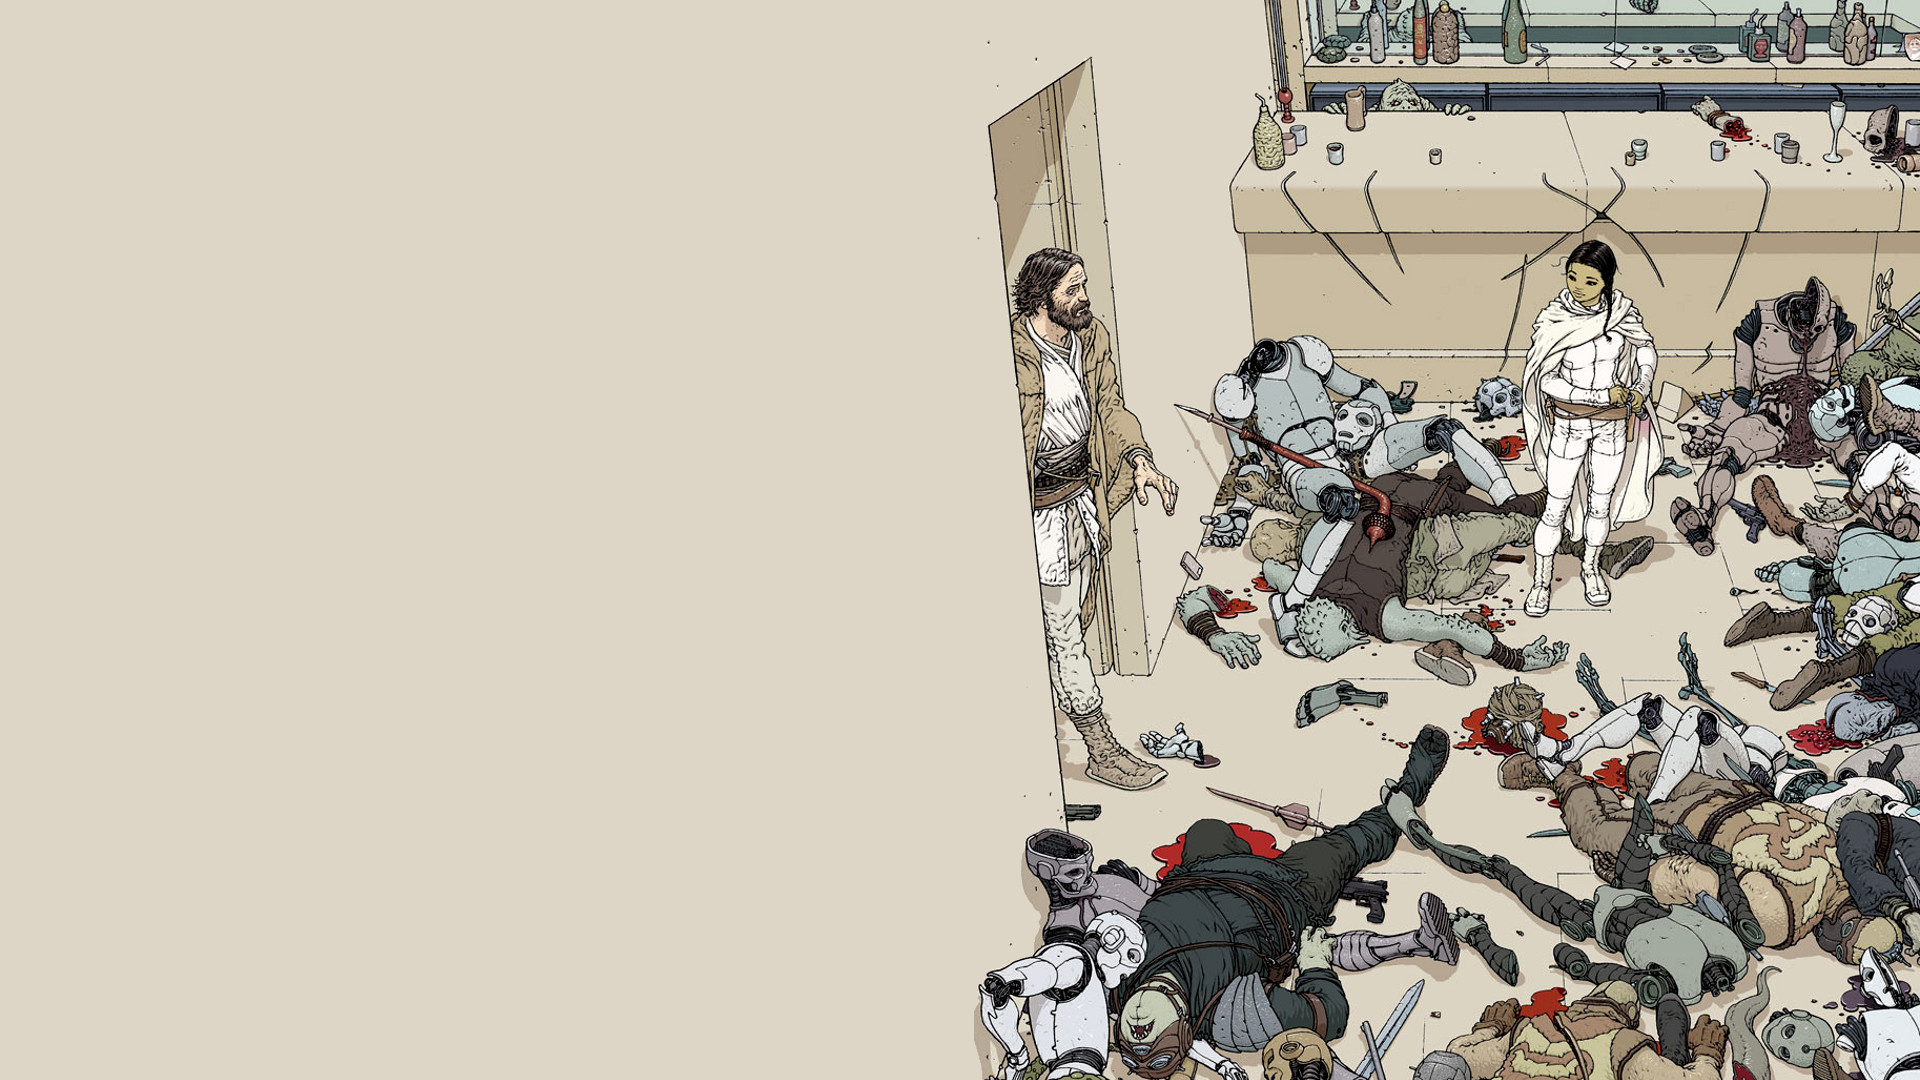 1920x1080 Photo 17 Jul 10 notes Â· Star wars by Frank Quitely